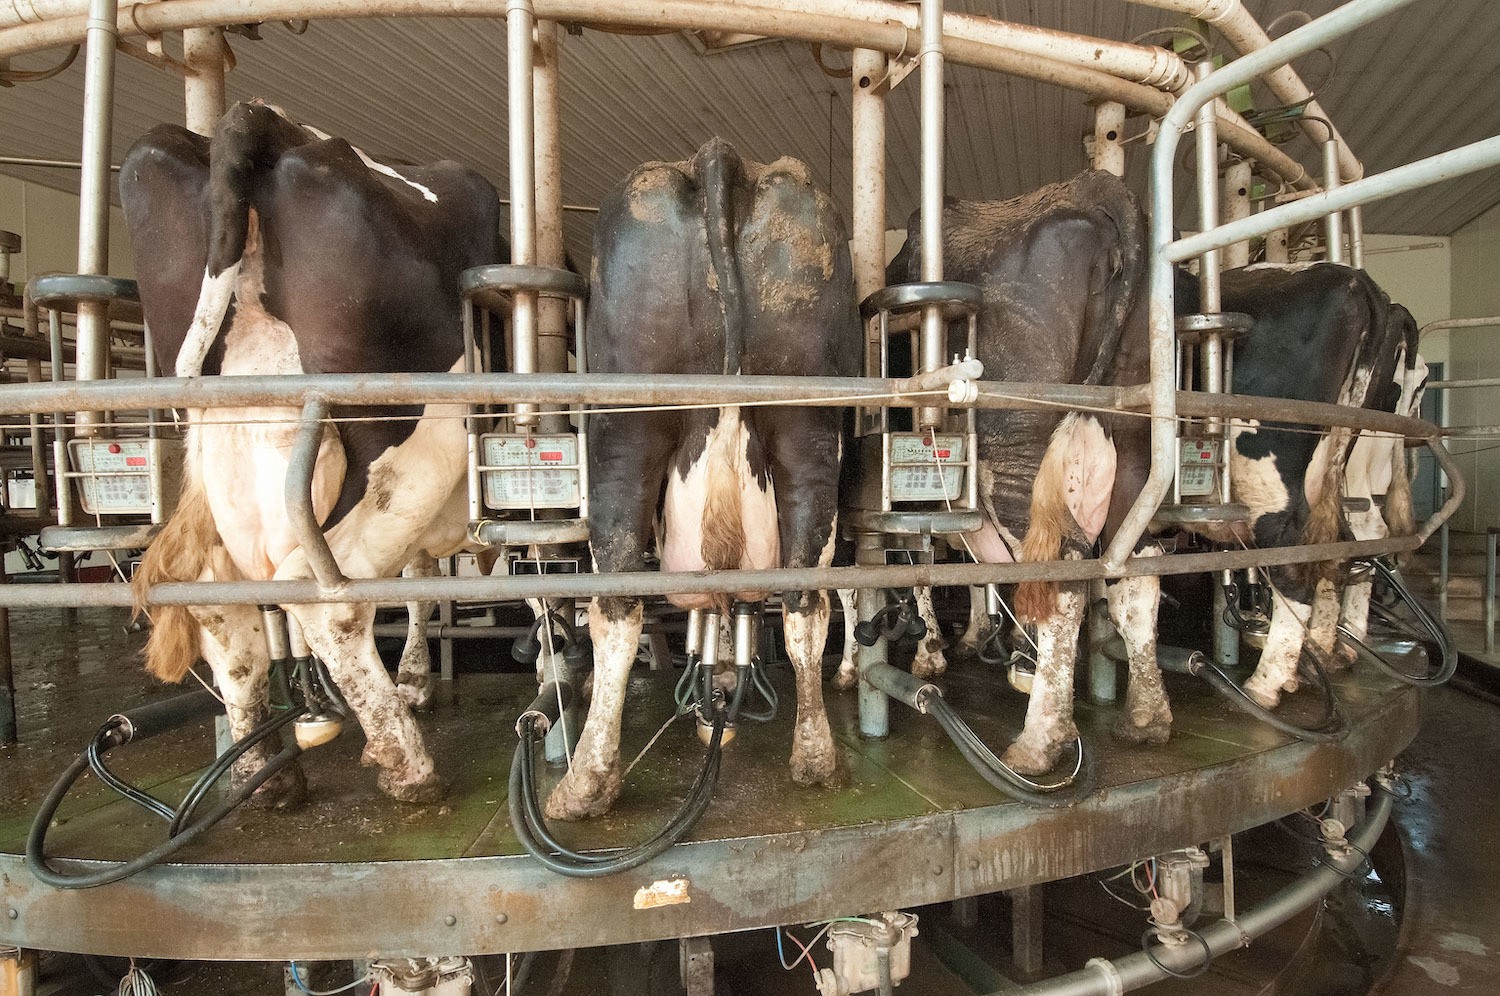 Dairy cattle being milked, November 2020.